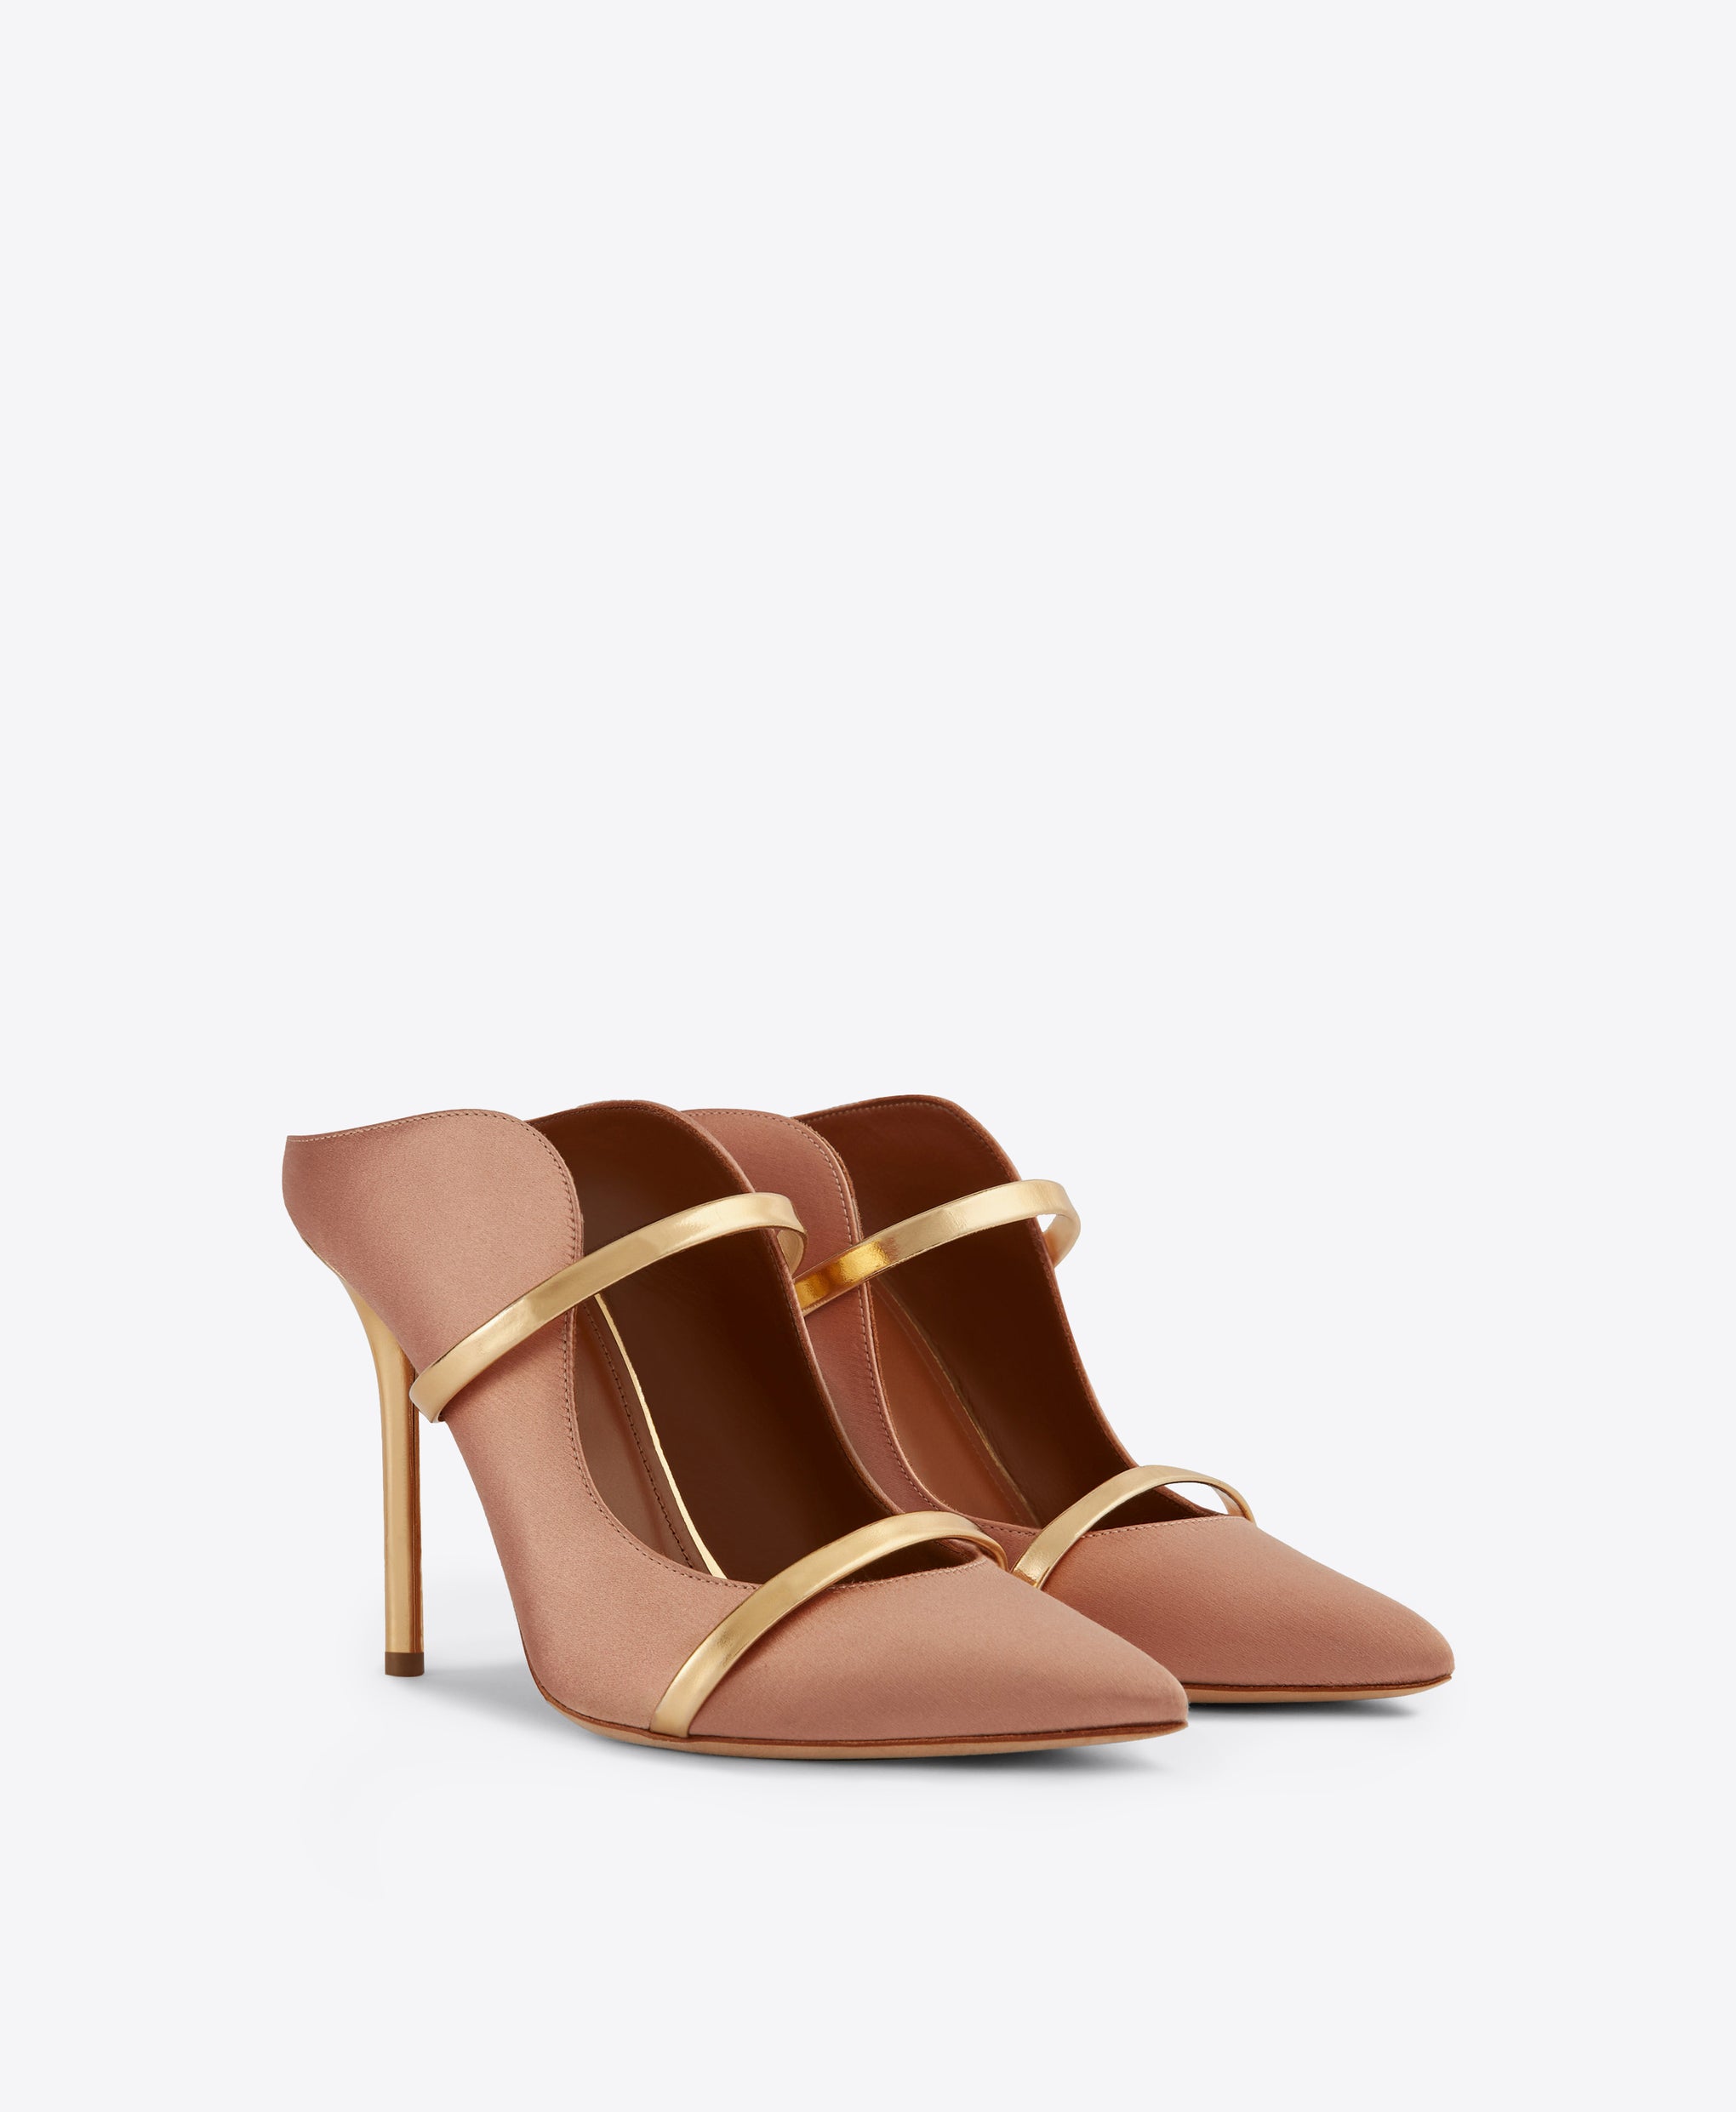 Women's Blush Pink Satin Heeled Mules With Pointed Toe Malone Souliers